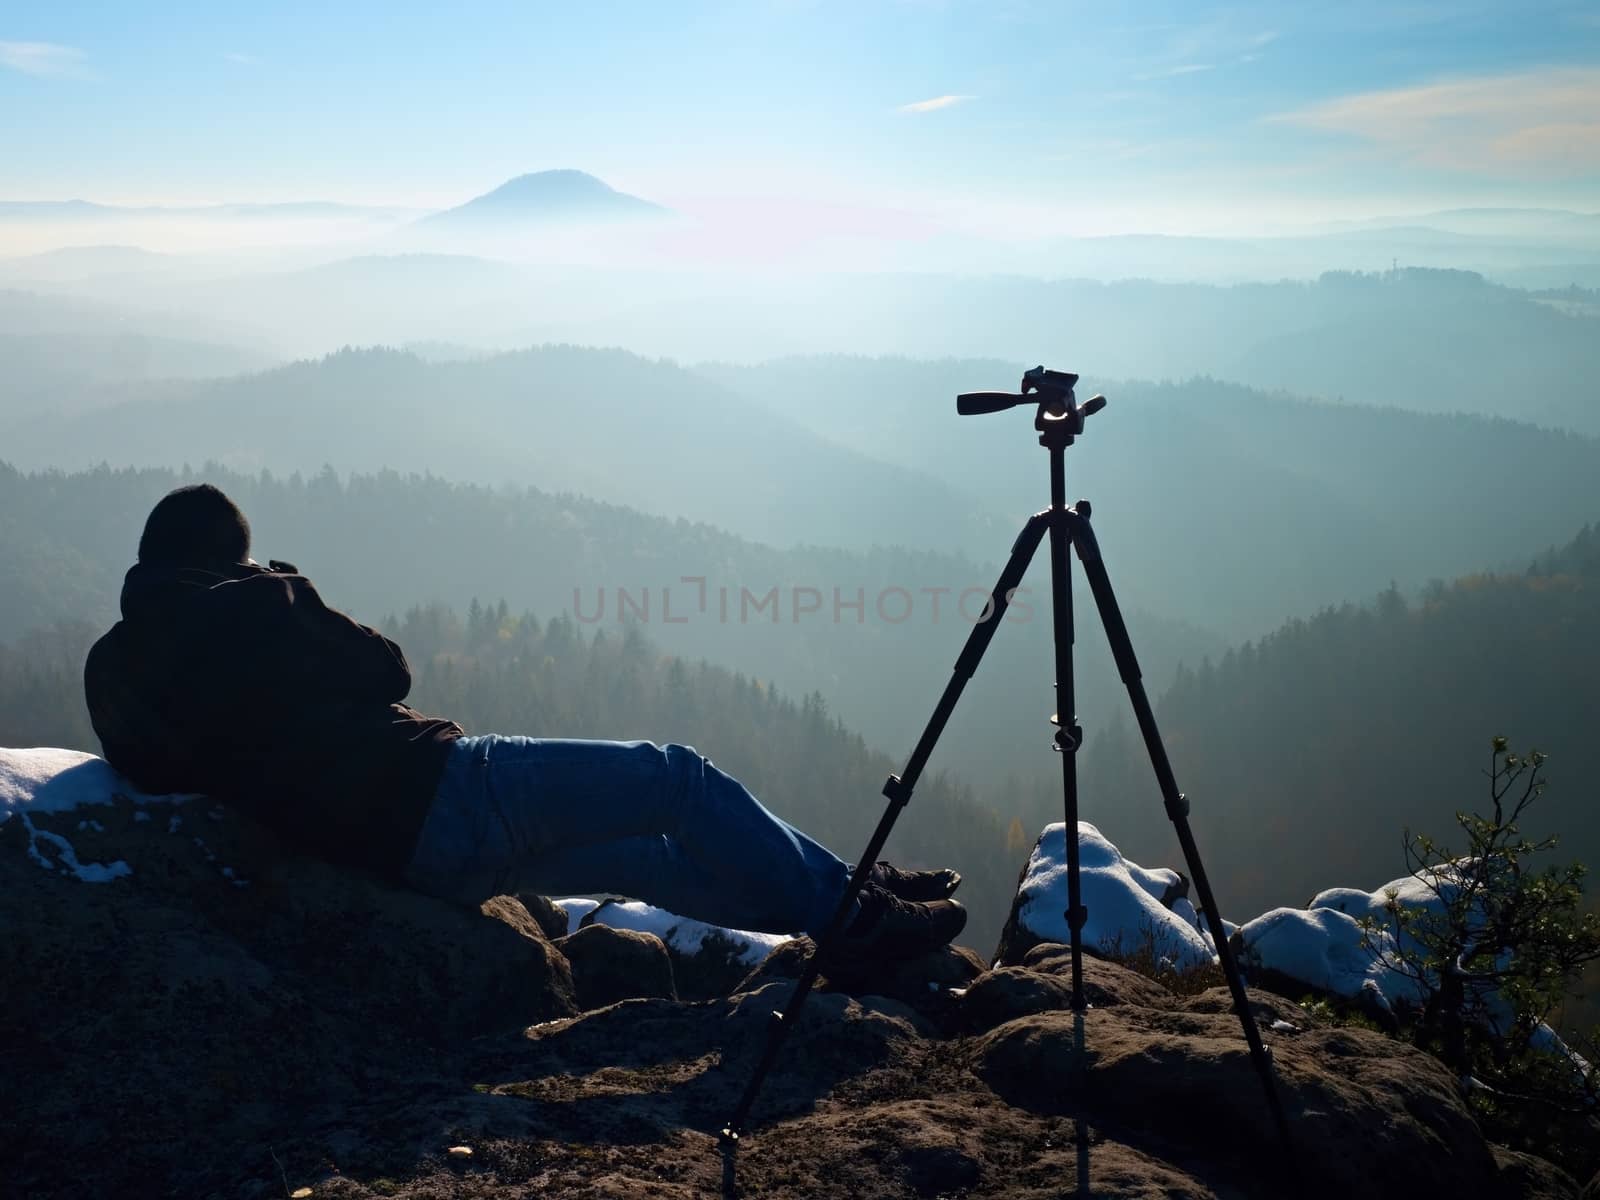 Man takes photos with camera on sharp rock. Dreamy fogy landscape by rdonar2